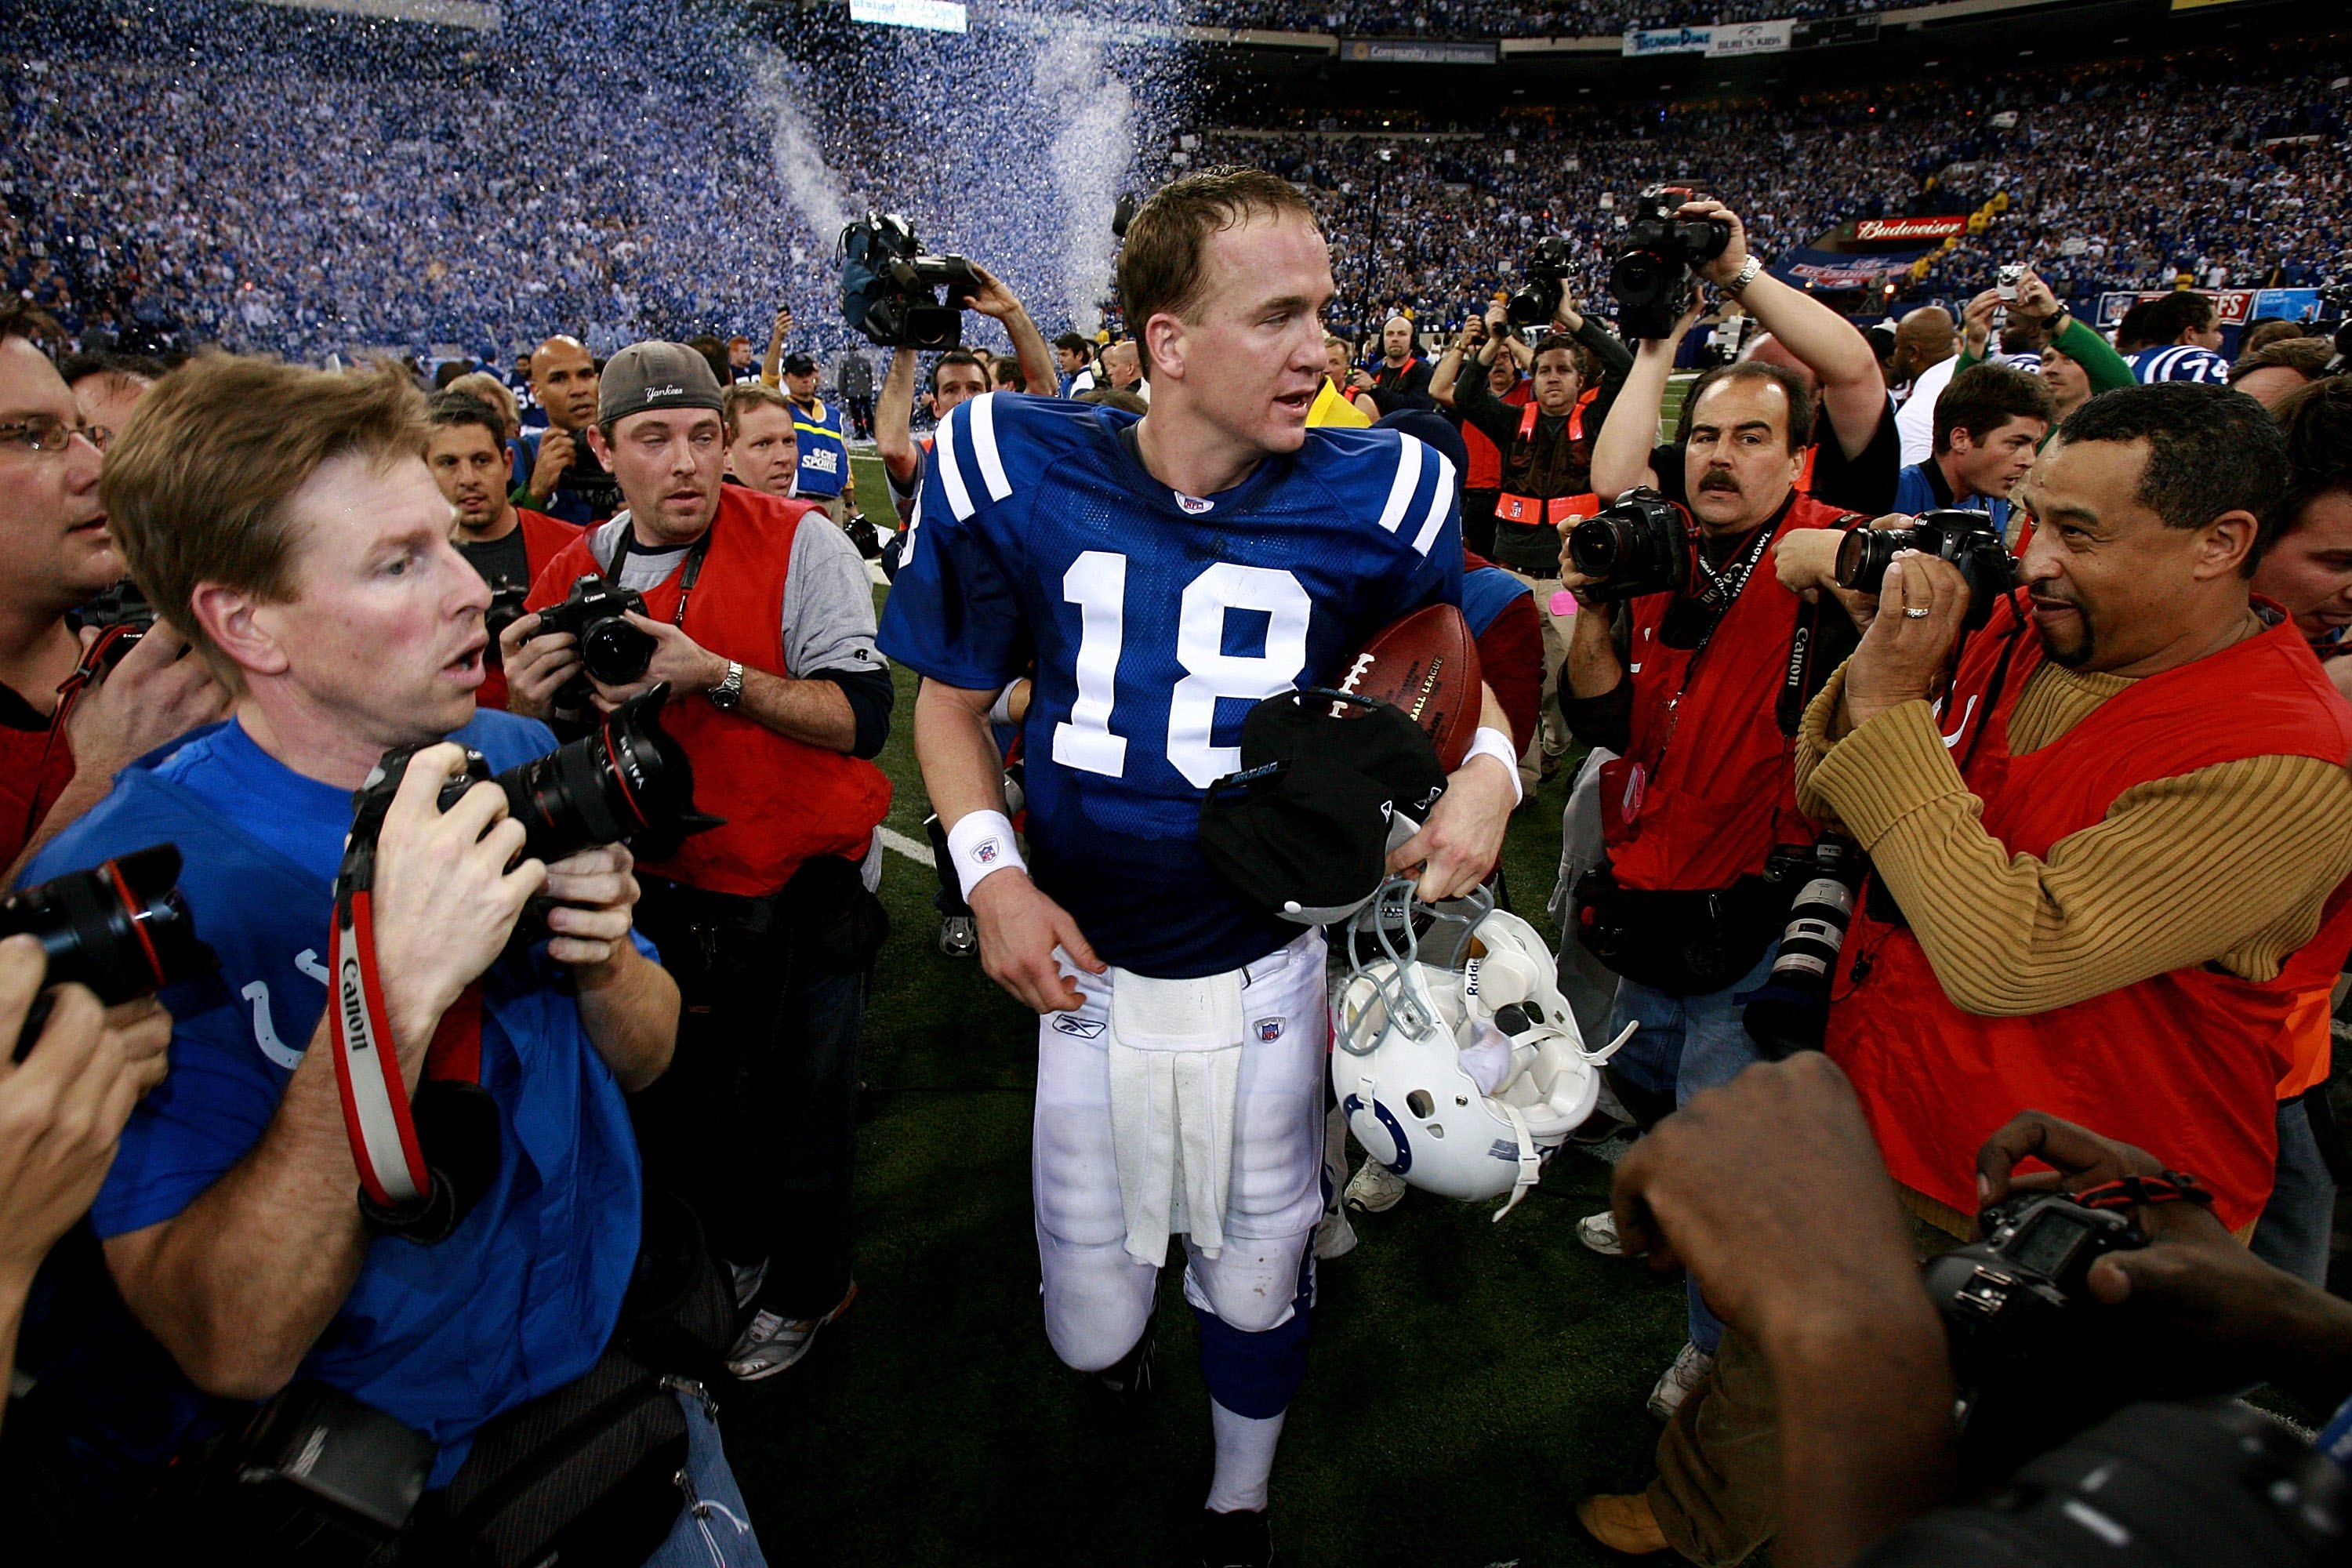 INDIANAPOLIS - JANUARY 21:  Quarterback Peyton Manning #18 of the Indianapolis Colts walks off the field after defeating the New England Patriots 38-34 in the AFC Championship Game on January 21, 2007 at the RCA Dome in Indianapolis, Indiana.  (Photo by D